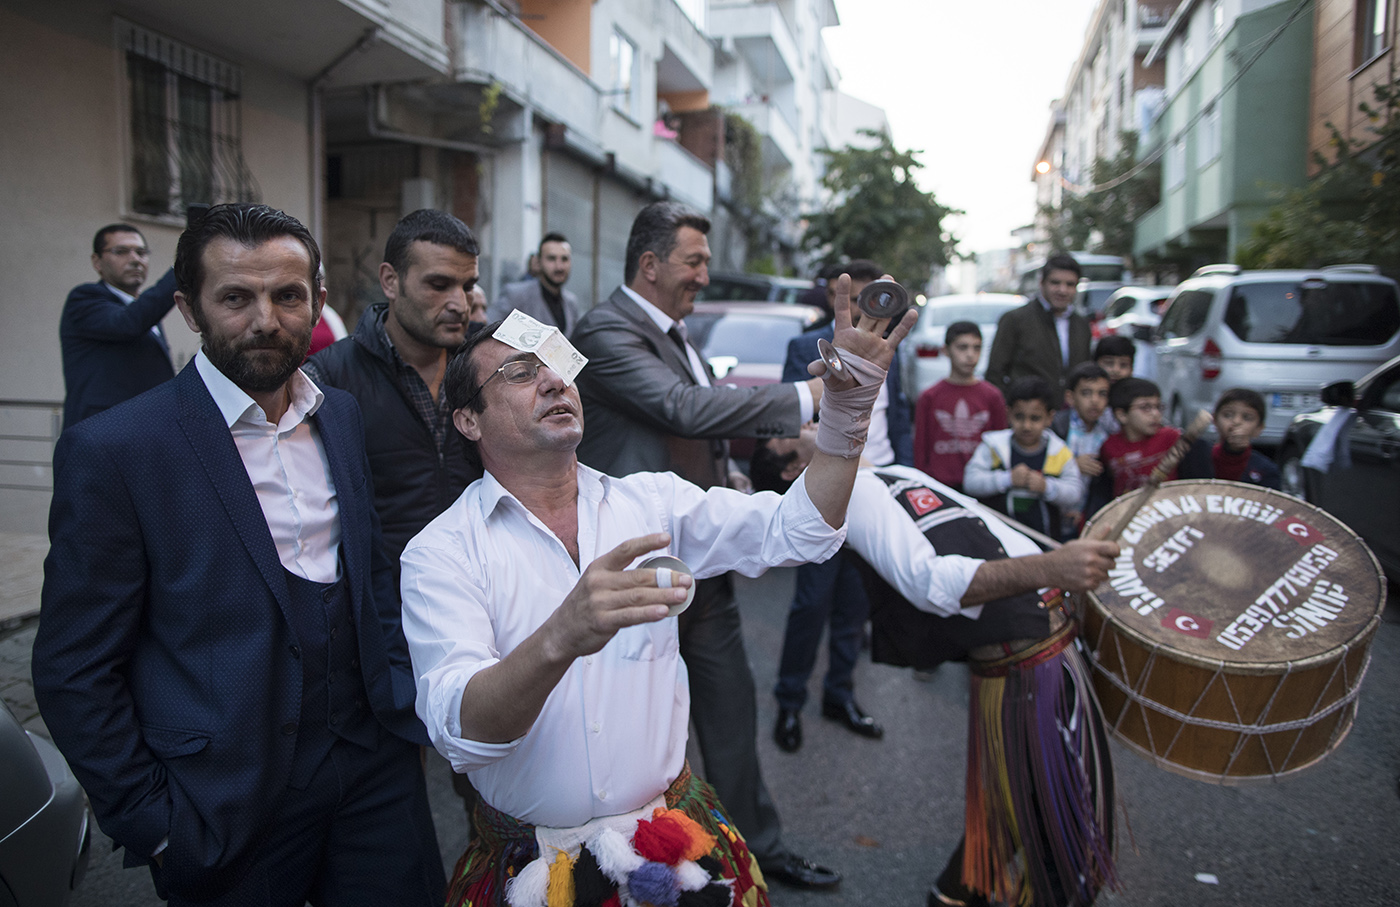 Osman Celik (C) dance with money which is given by people on his head during a wedding in Istanbul, Turkey, 16 November 2019. 